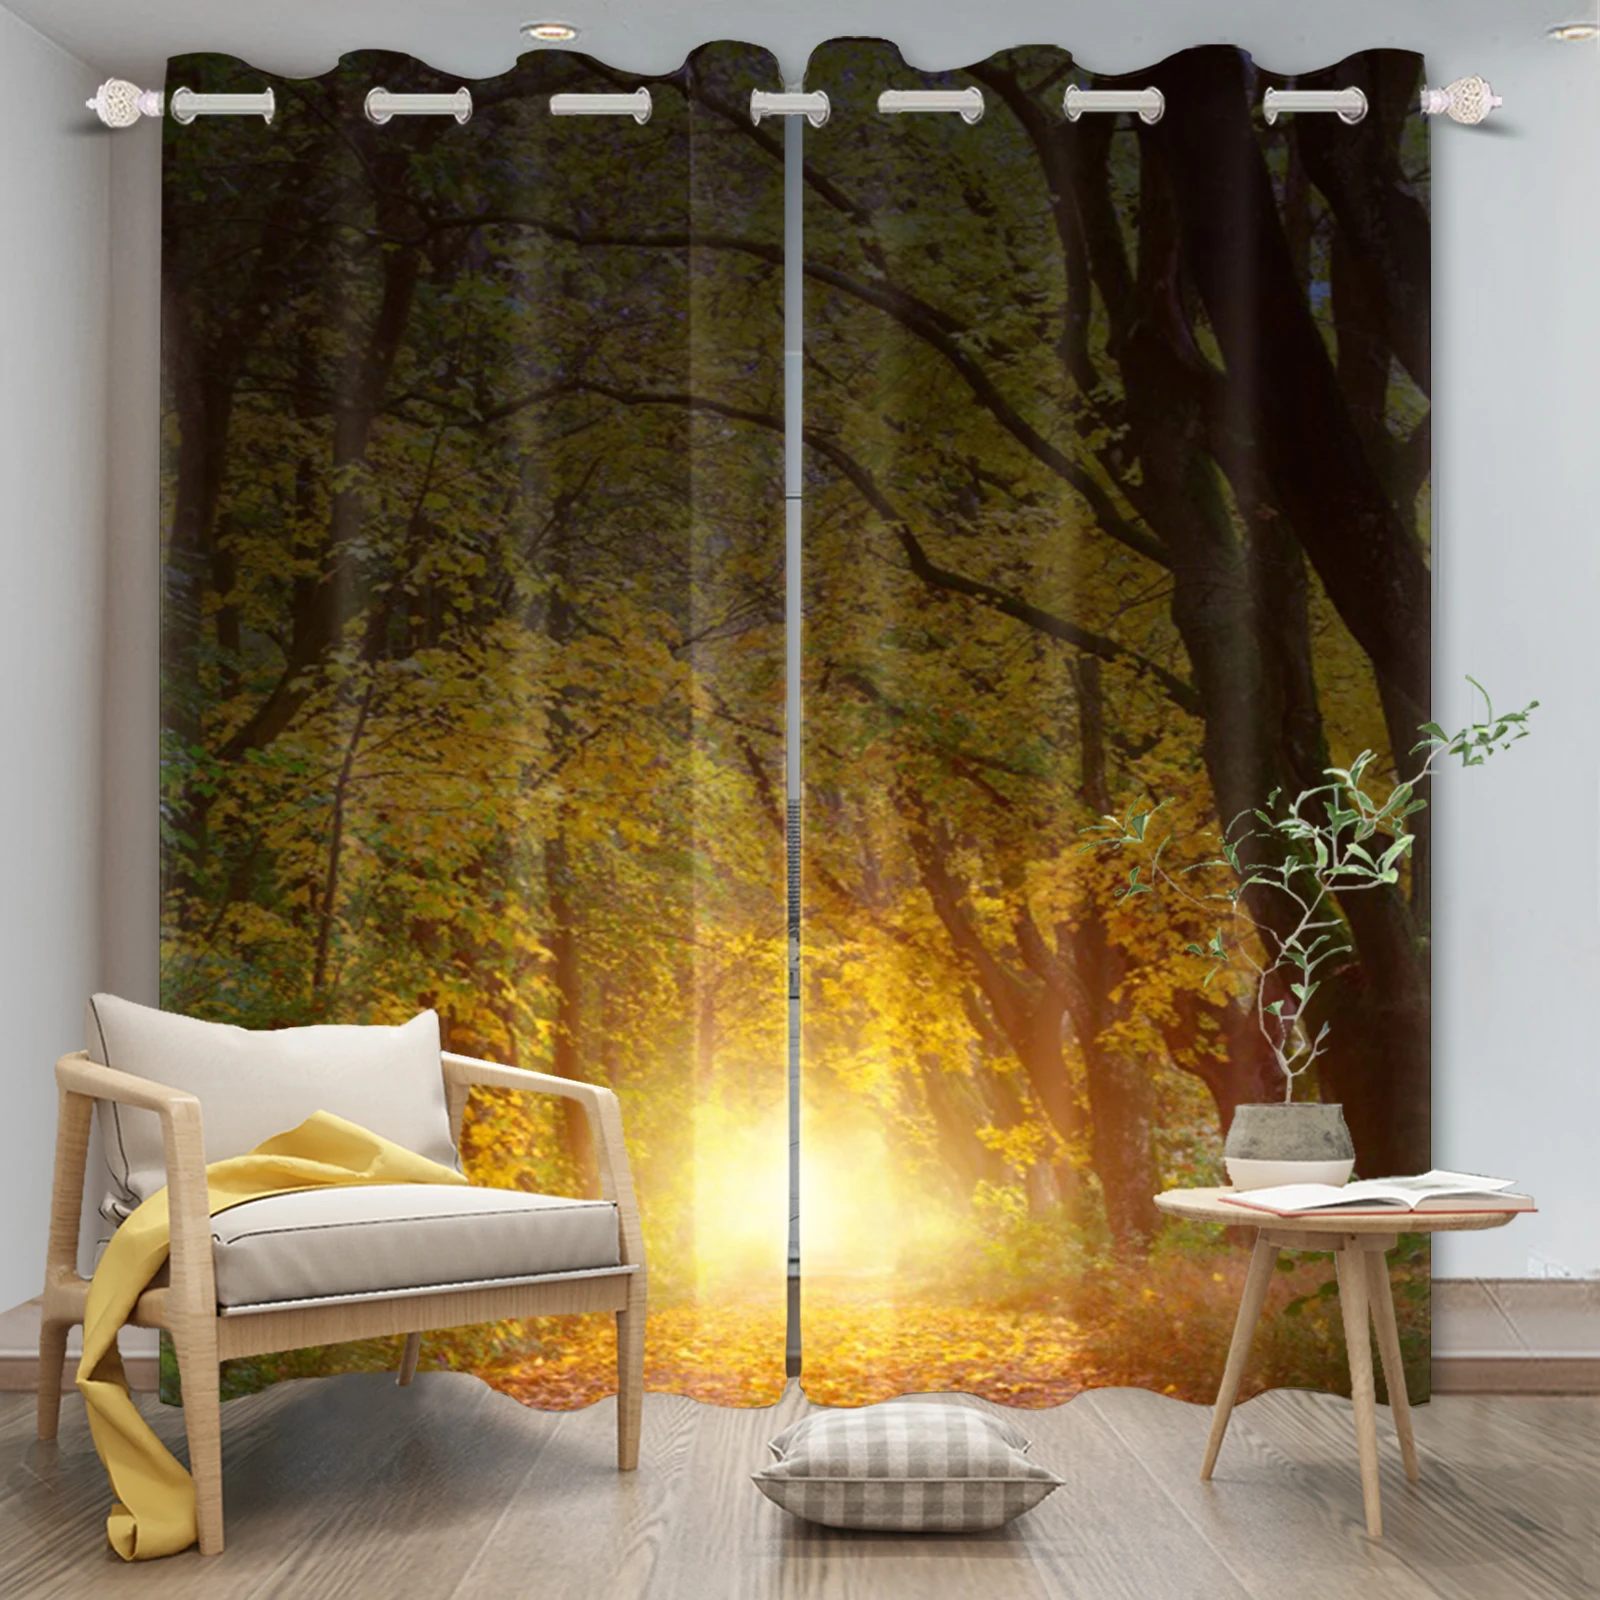 

Green Forest Path Printed Curtains Modern Autumn Natural Scenery Living Room Bedroom Perforated Blackout Drapes Polyester